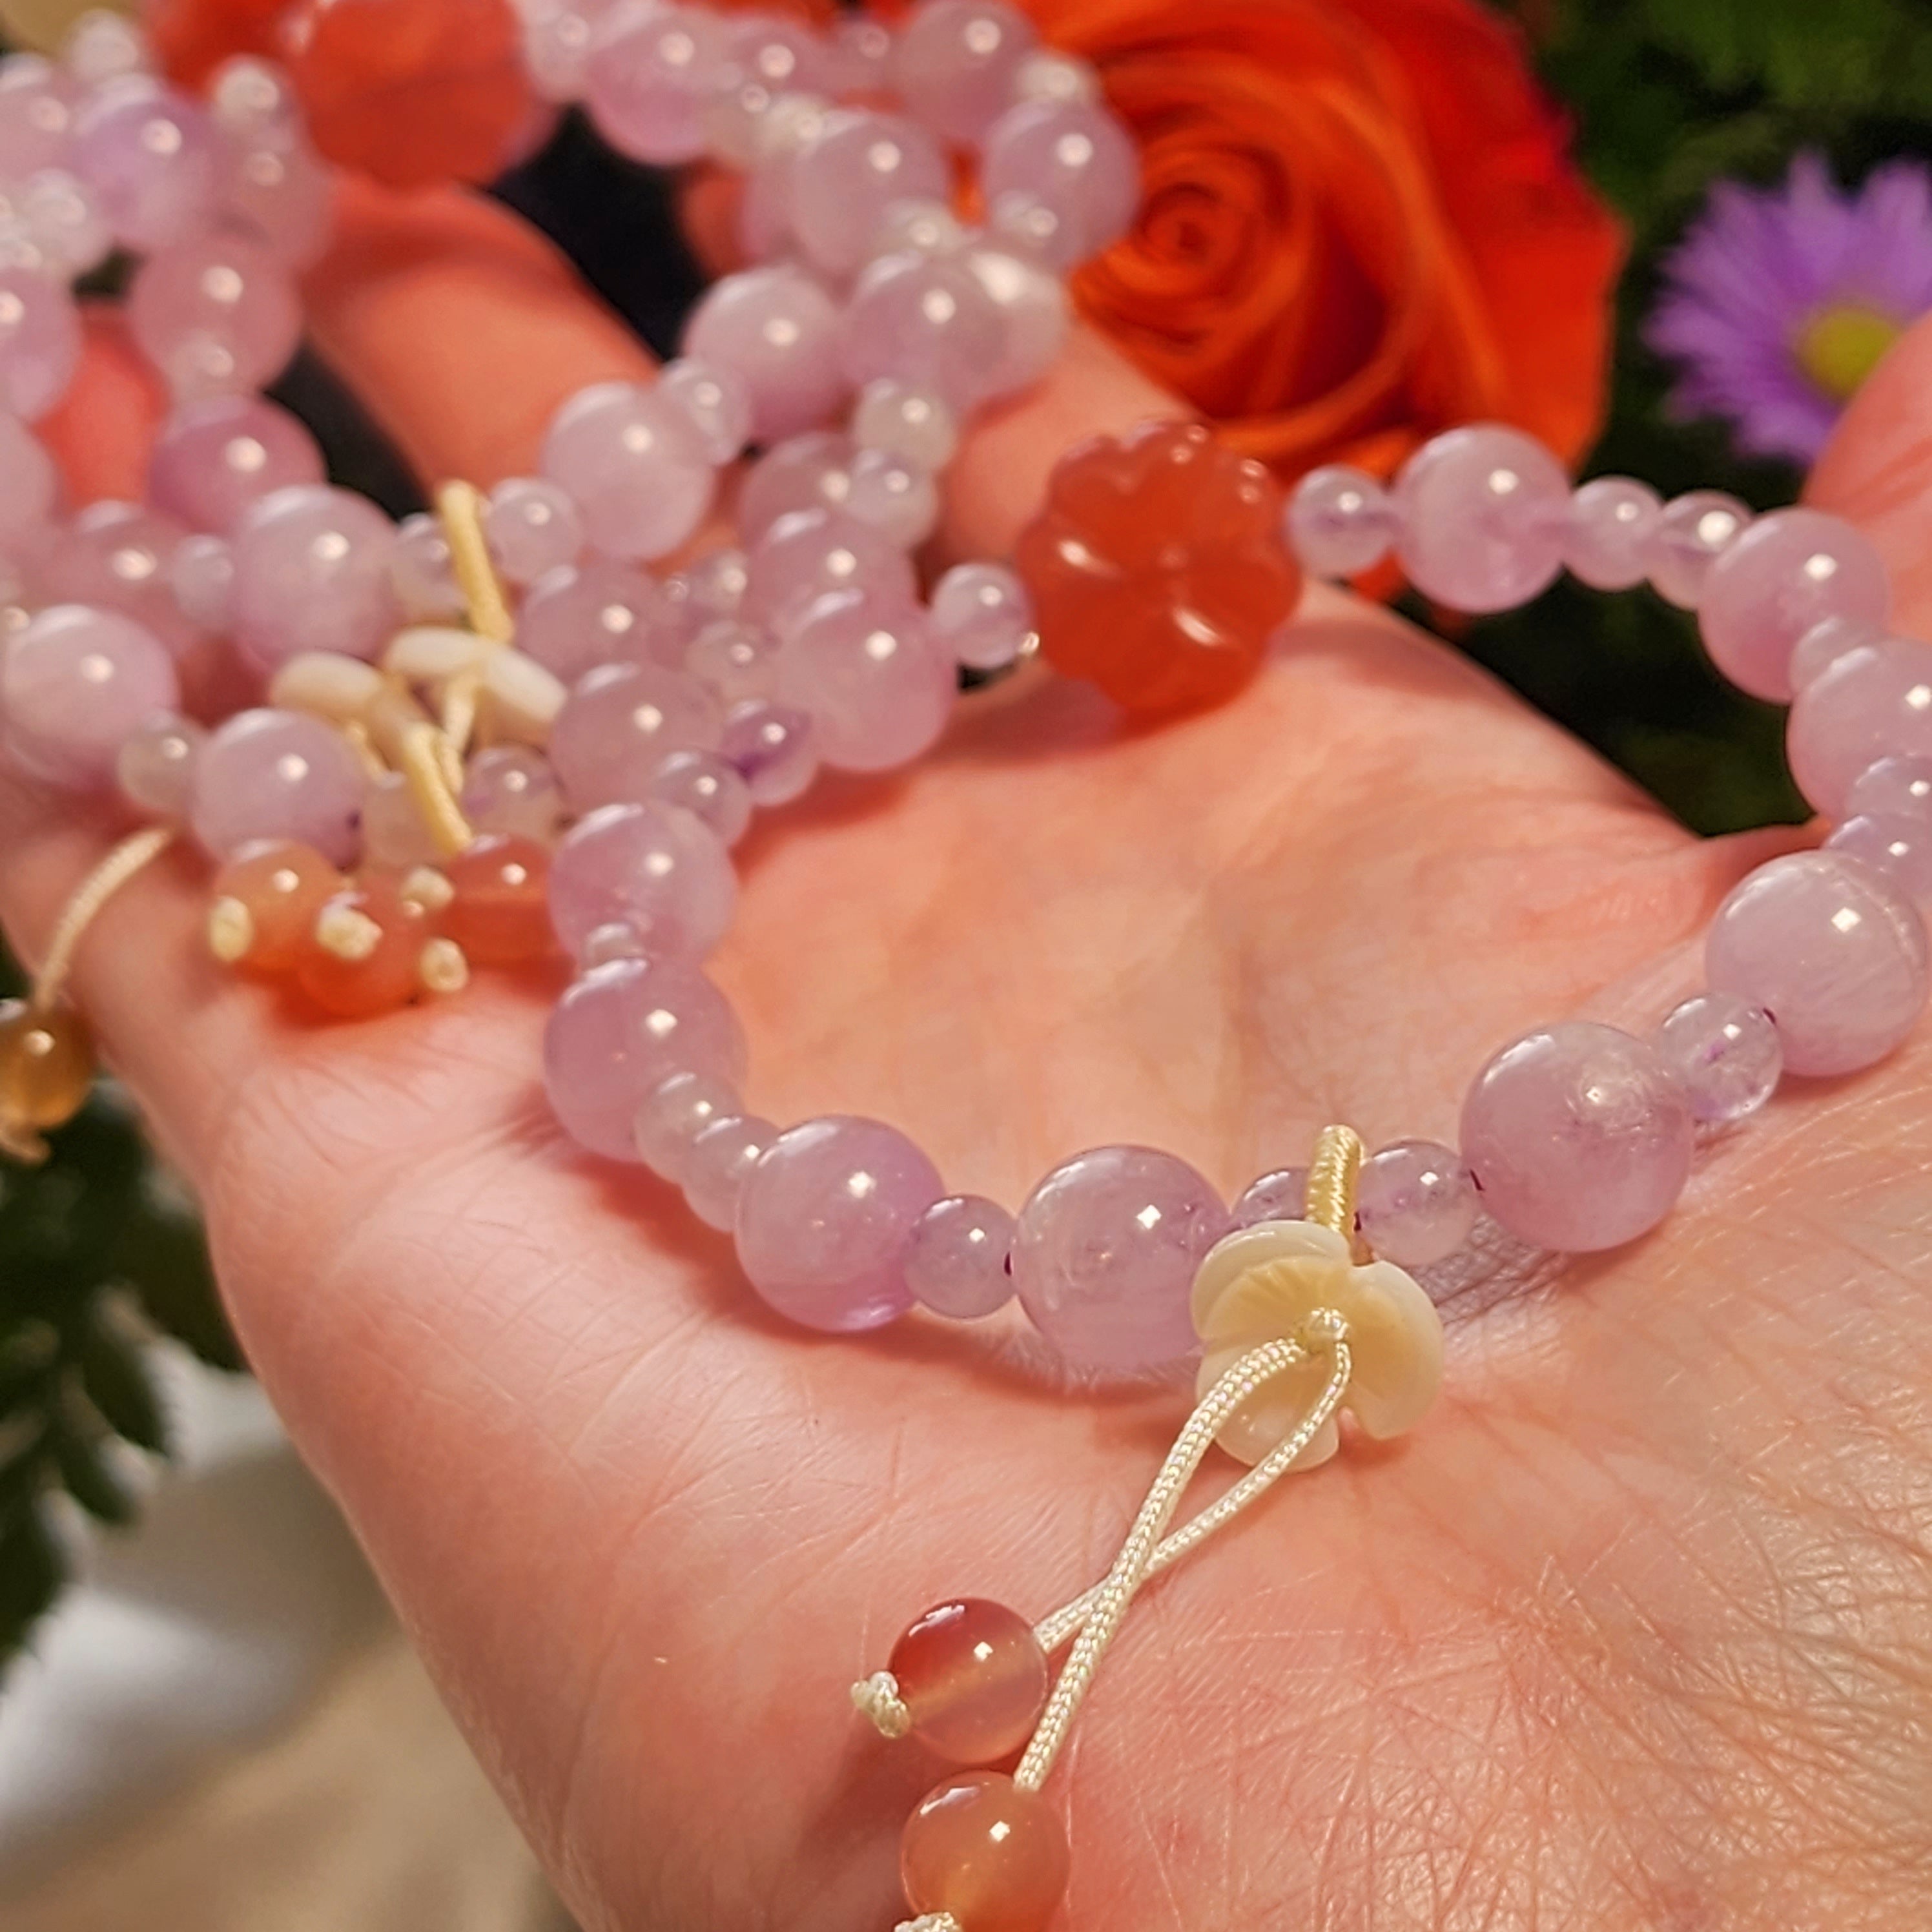 Kunzite, Mother of Pearl & Yanyuan Flower Bracelet for Emotional Balance and Family Healing